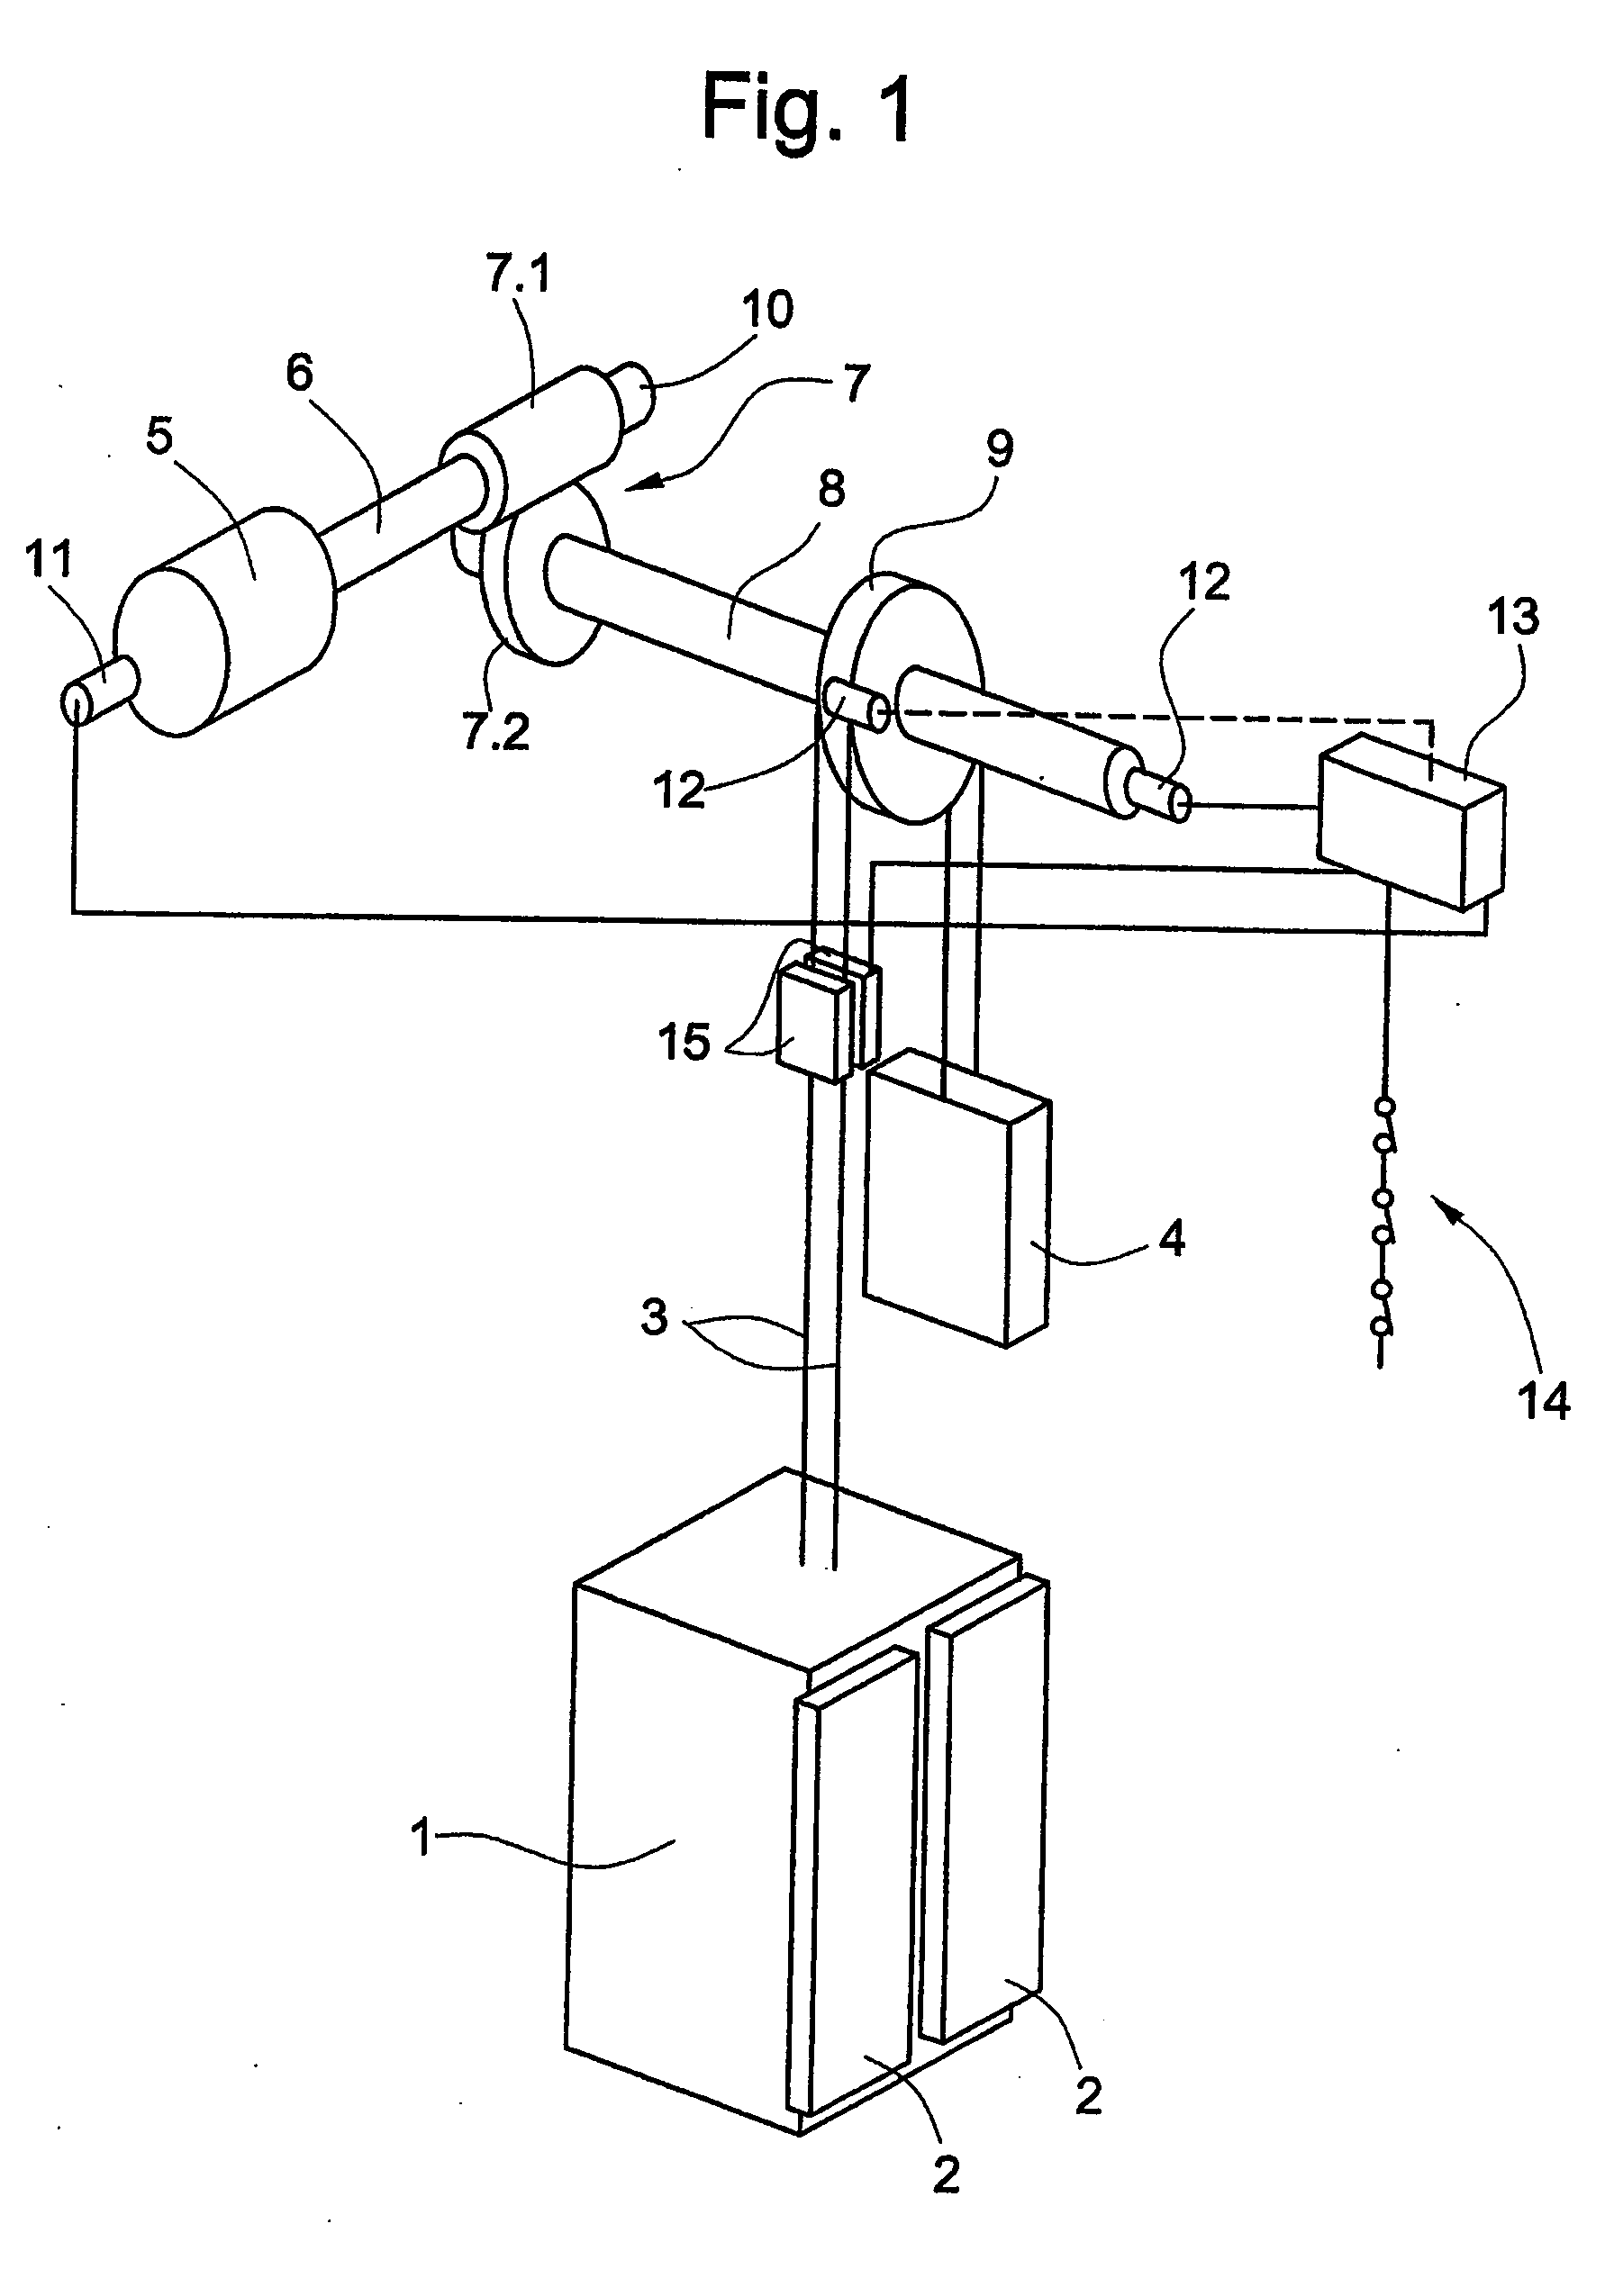 Cable brake for an elevator